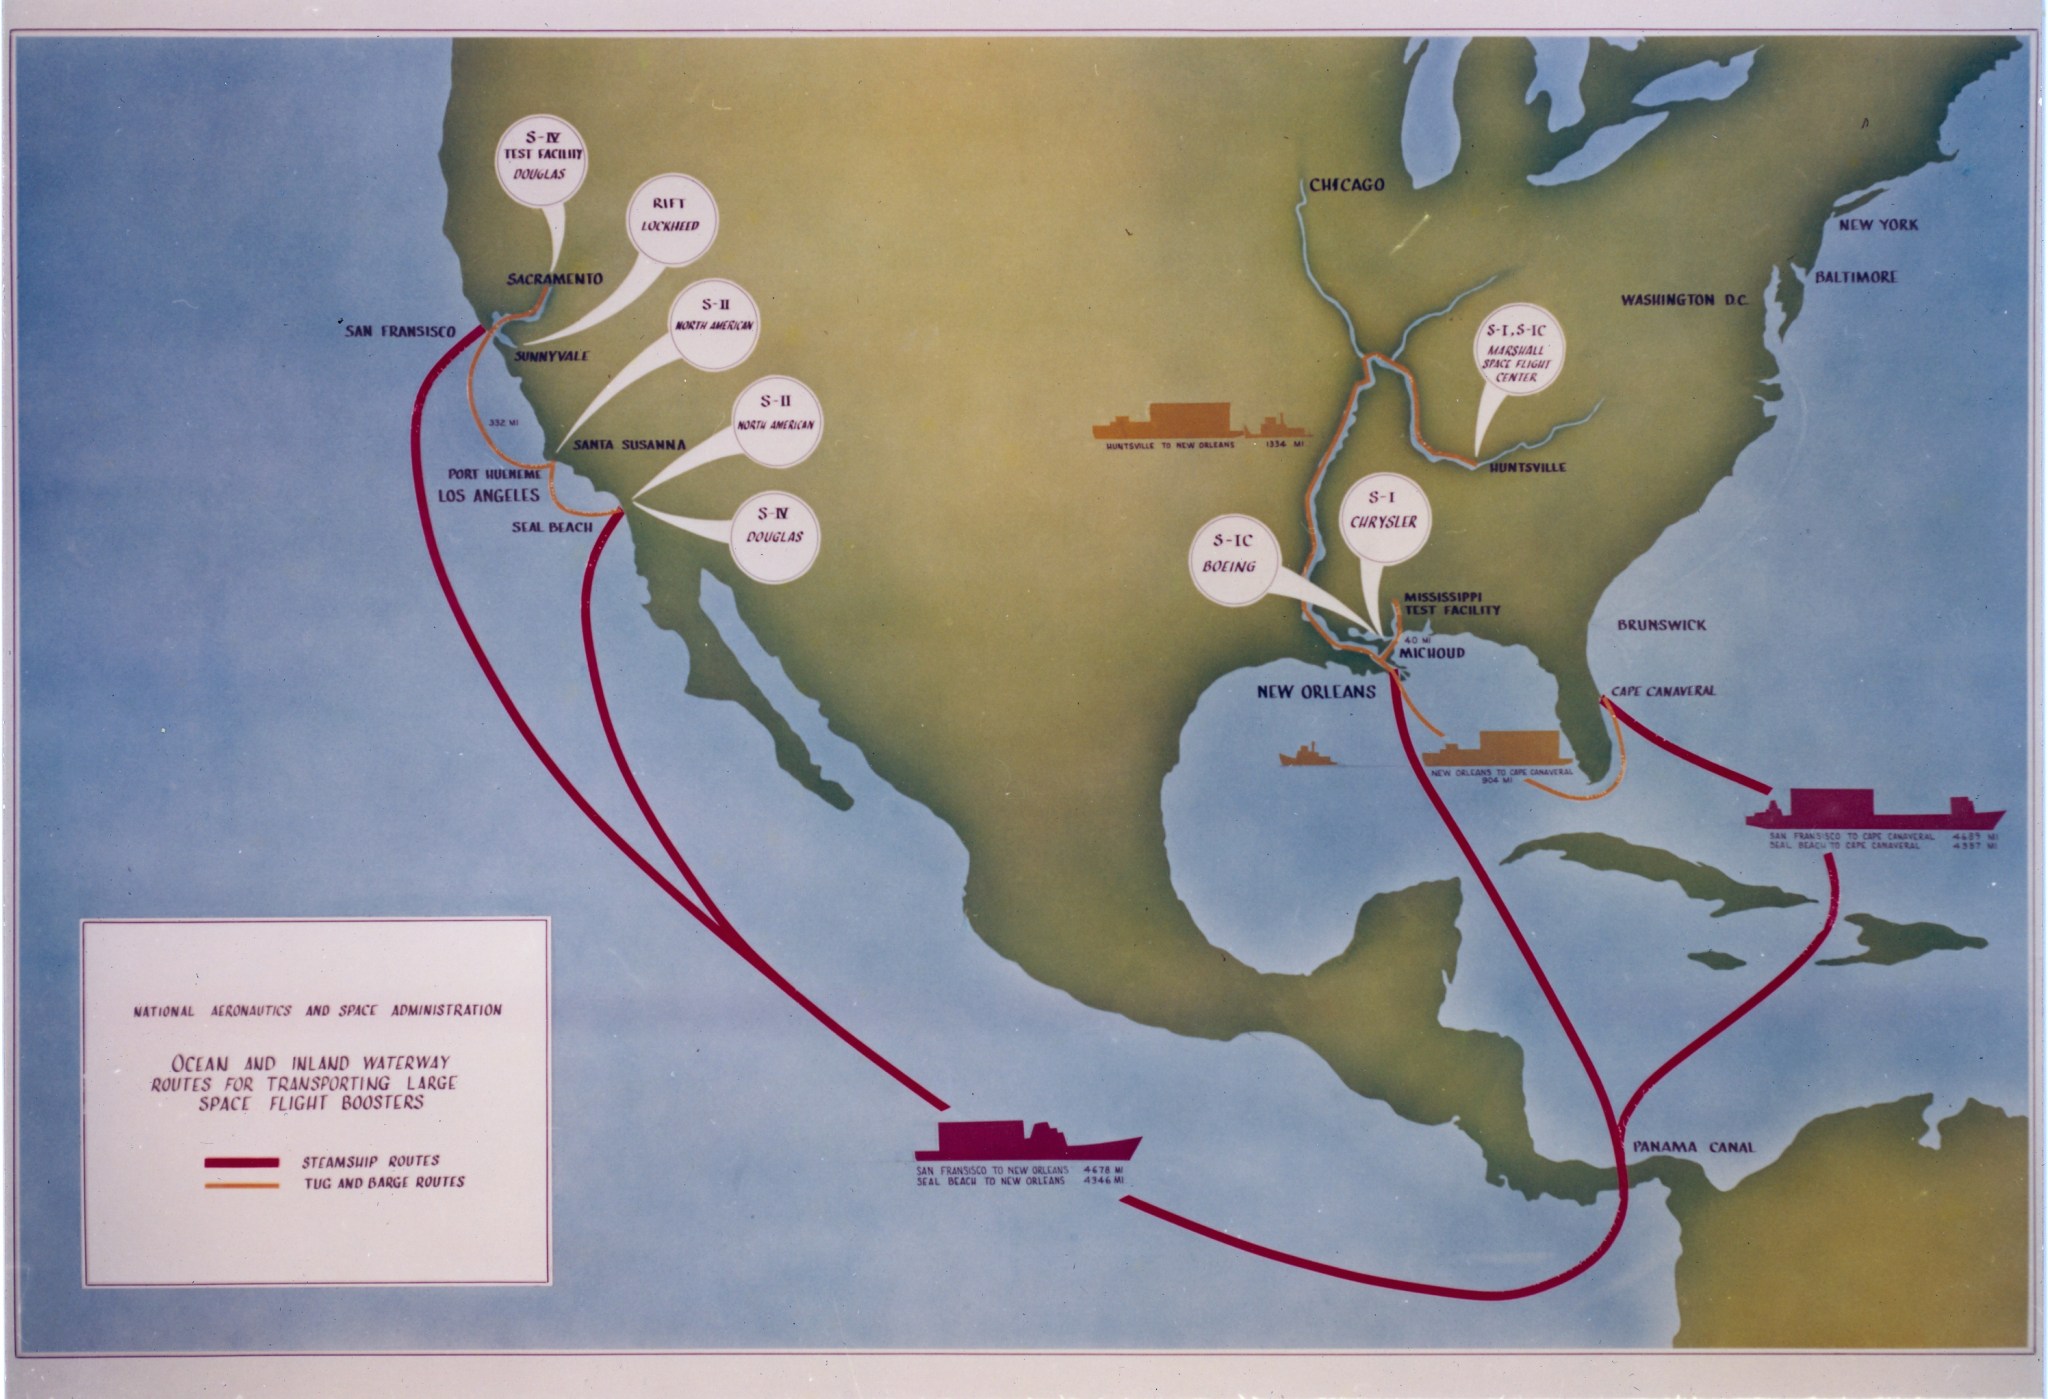 Map of the U.S. with lines showing ship routes